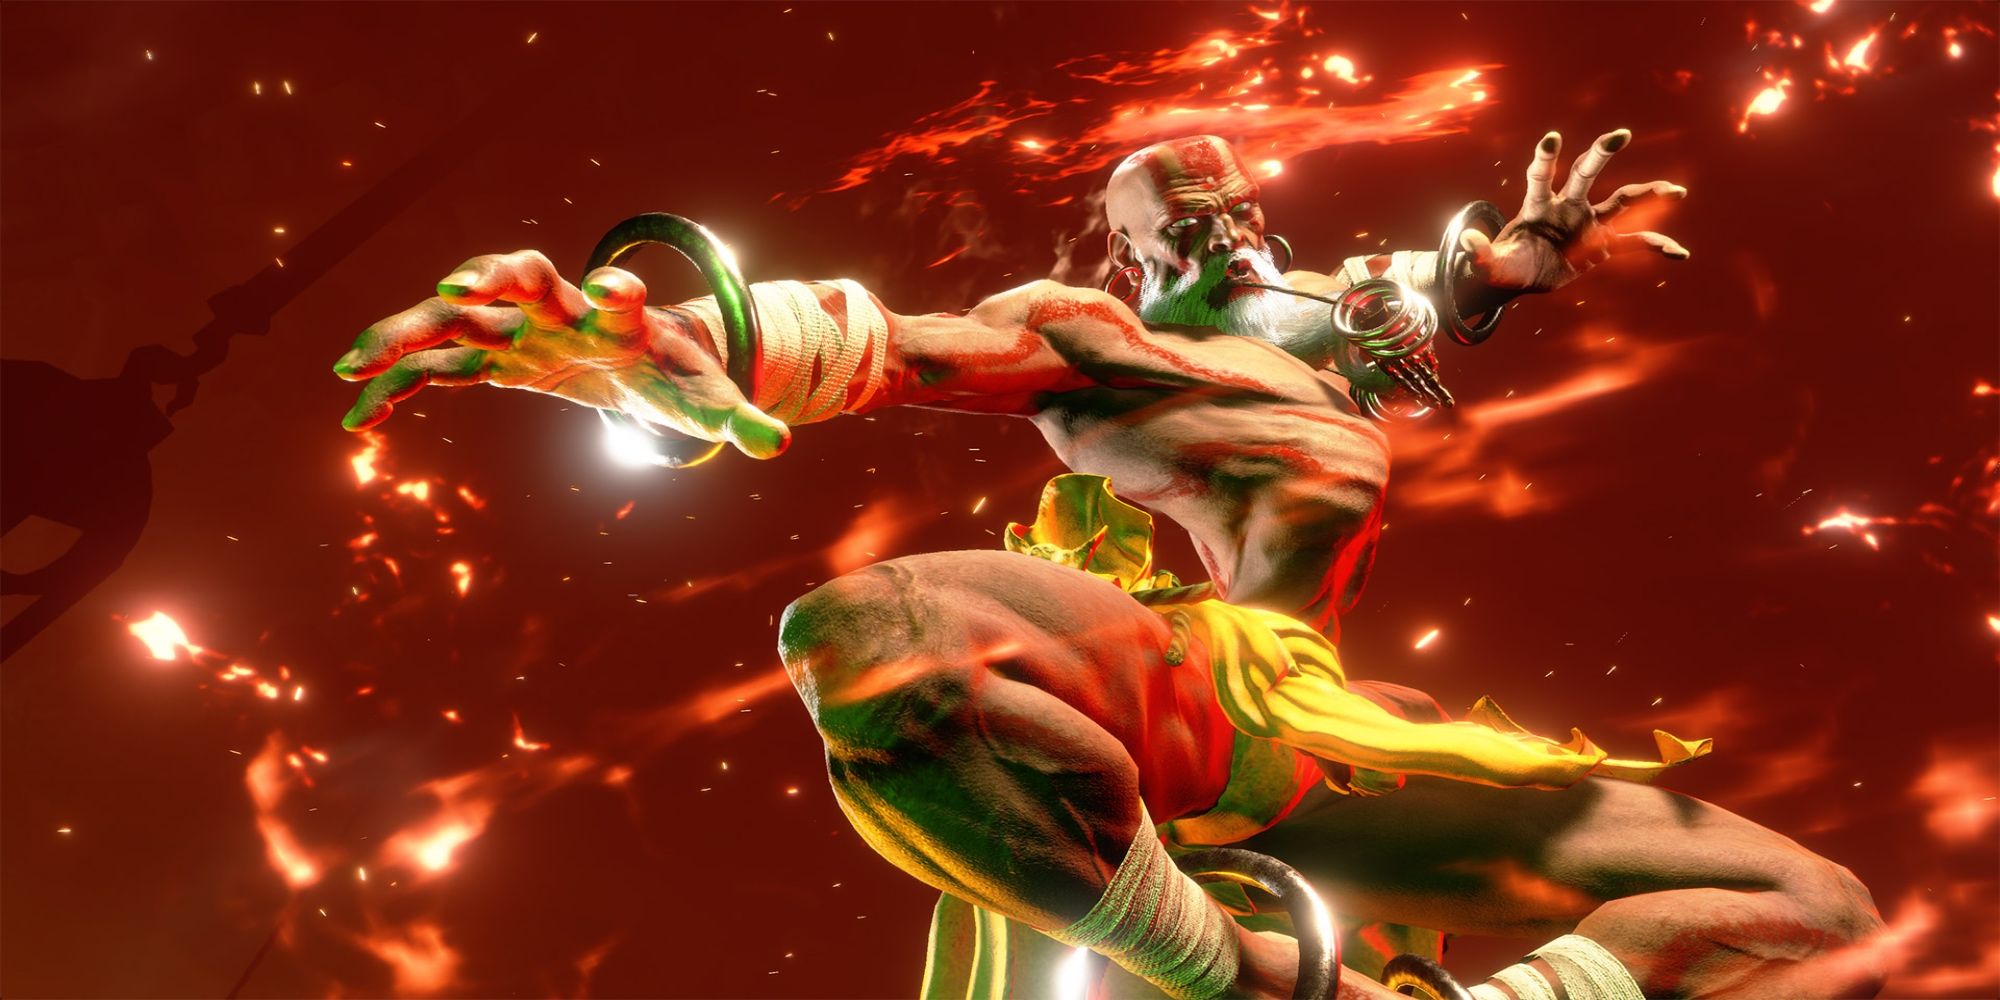 Dhalsim uses Yoga Fire to fry his enemies